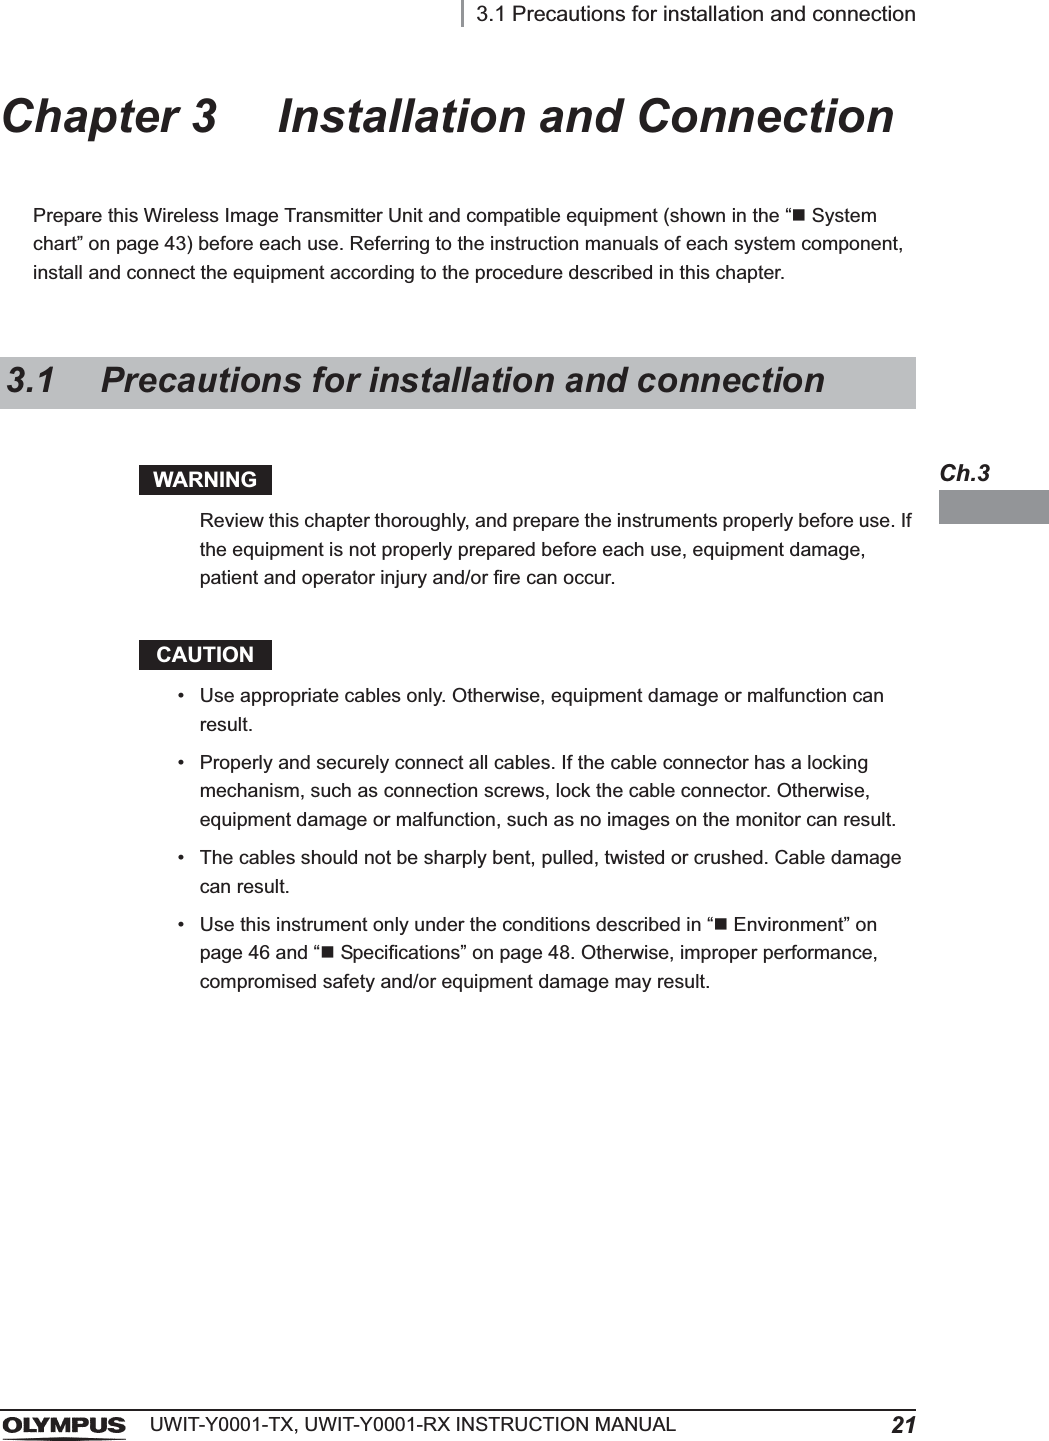 3.1 Precautions for installation and connection21UWIT-Y0001-TX, UWIT-Y0001-RX INSTRUCTION MANUALCh.3Chapter 3 Installation and ConnectionPrepare this Wireless Image Transmitter Unit and compatible equipment (shown in the “System chart” on page 43) before each use. Referring to the instruction manuals of each system component, install and connect the equipment according to the procedure described in this chapter.WARNINGReview this chapter thoroughly, and prepare the instruments properly before use. If the equipment is not properly prepared before each use, equipment damage, patient and operator injury and/or fire can occur.CAUTION• Use appropriate cables only. Otherwise, equipment damage or malfunction can result.• Properly and securely connect all cables. If the cable connector has a locking mechanism, such as connection screws, lock the cable connector. Otherwise, equipment damage or malfunction, such as no images on the monitor can result.• The cables should not be sharply bent, pulled, twisted or crushed. Cable damage can result.• Use this instrument only under the conditions described in “Environment” on page 46 and “Specifications” on page 48. Otherwise, improper performance, compromised safety and/or equipment damage may result.3.1 Precautions for installation and connection